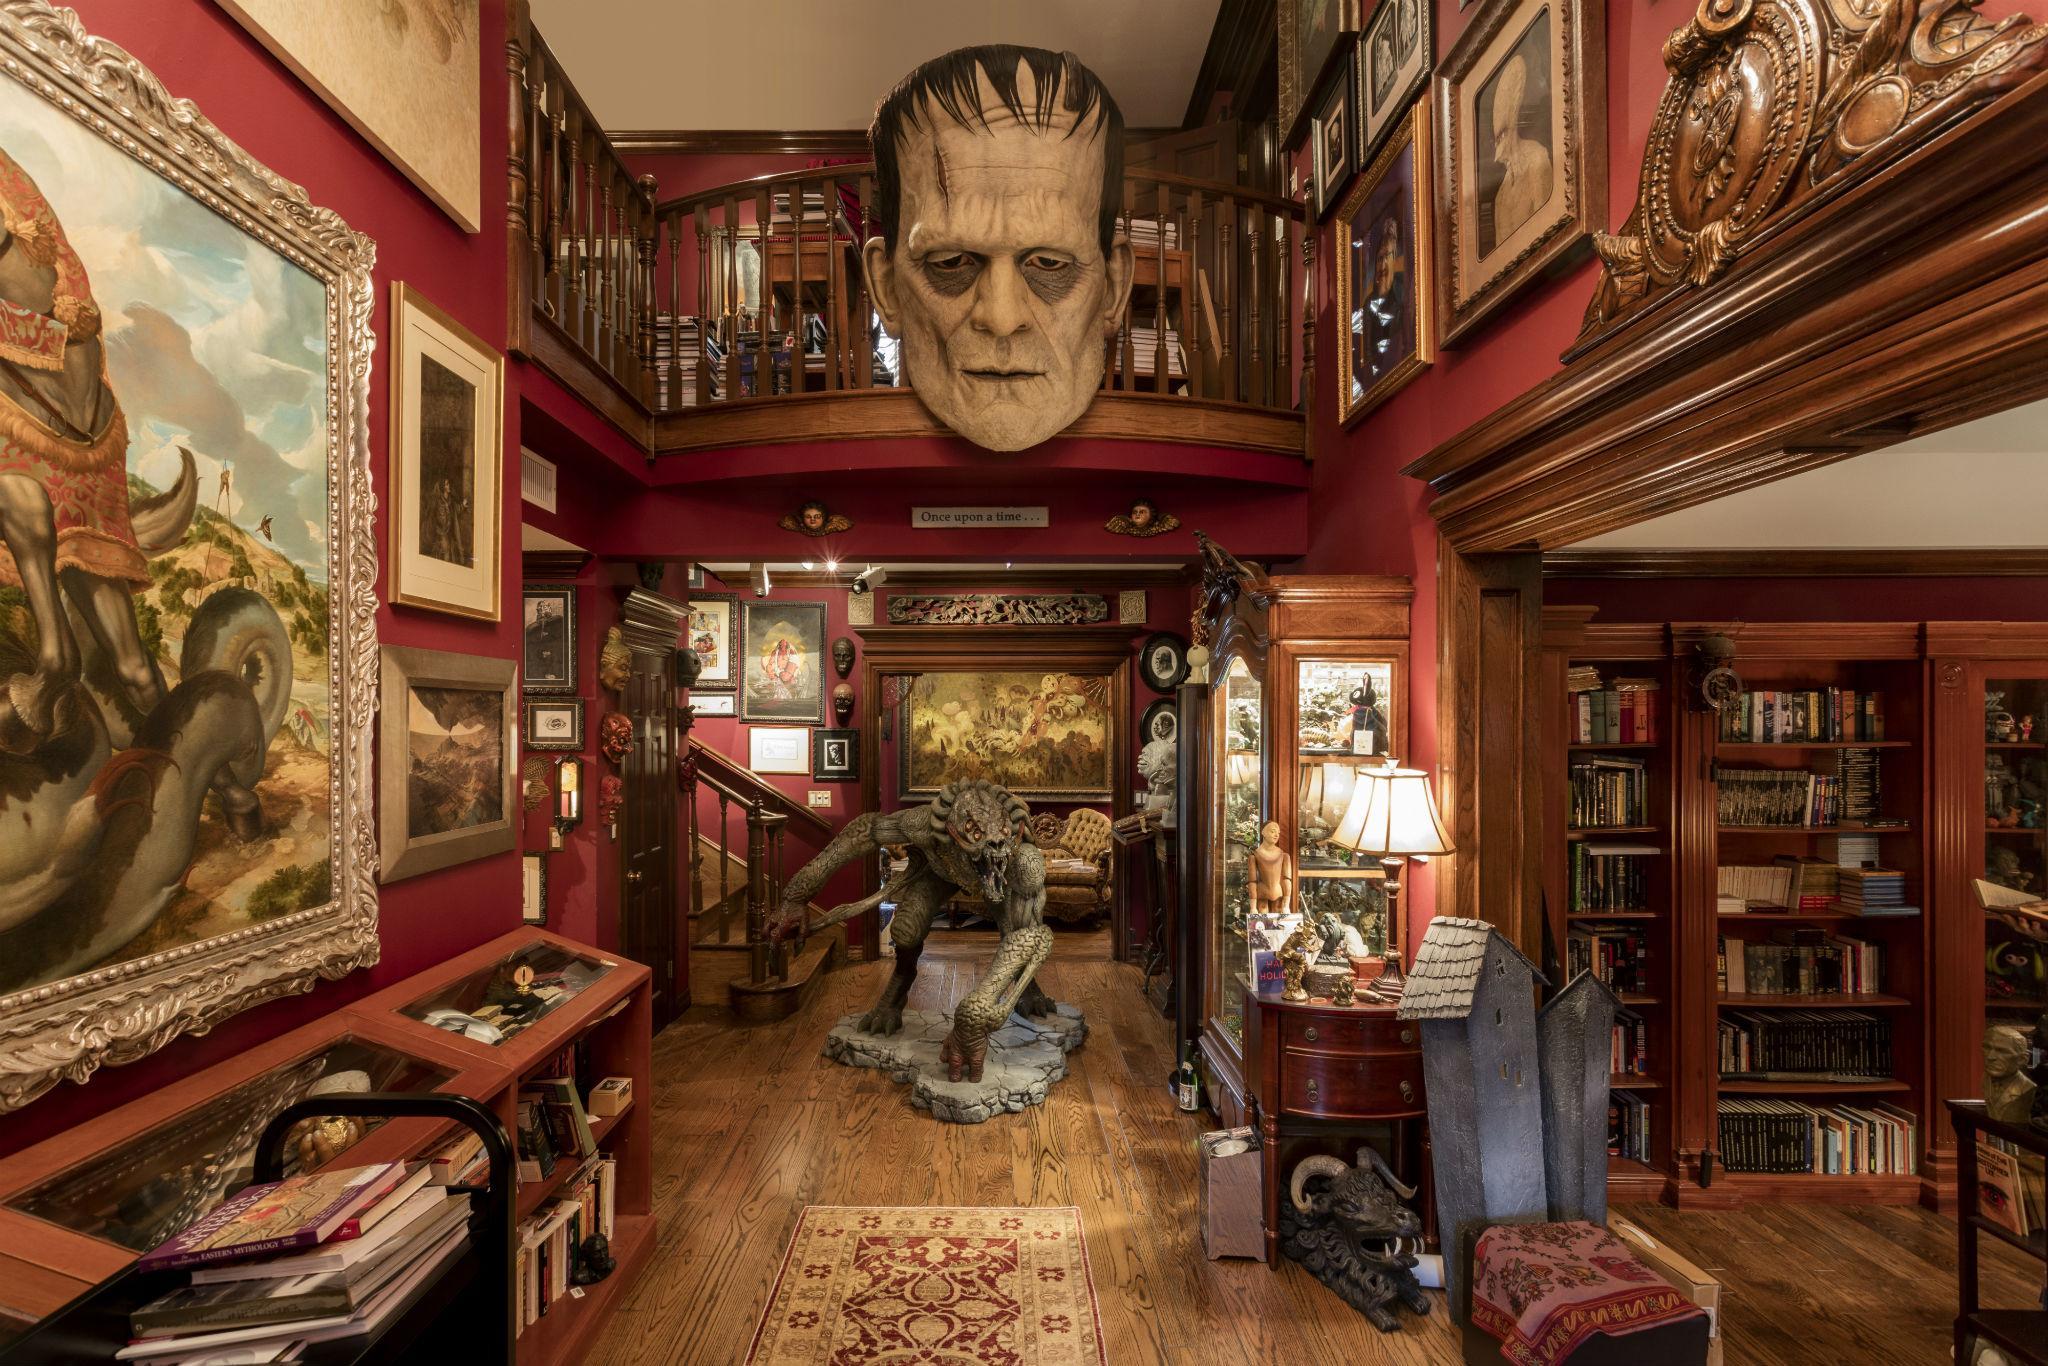 &#13;
The vast Frankenstein head that normally looms over the entrance hall at Bleak House will be featured in the LACMA exhibition &#13;